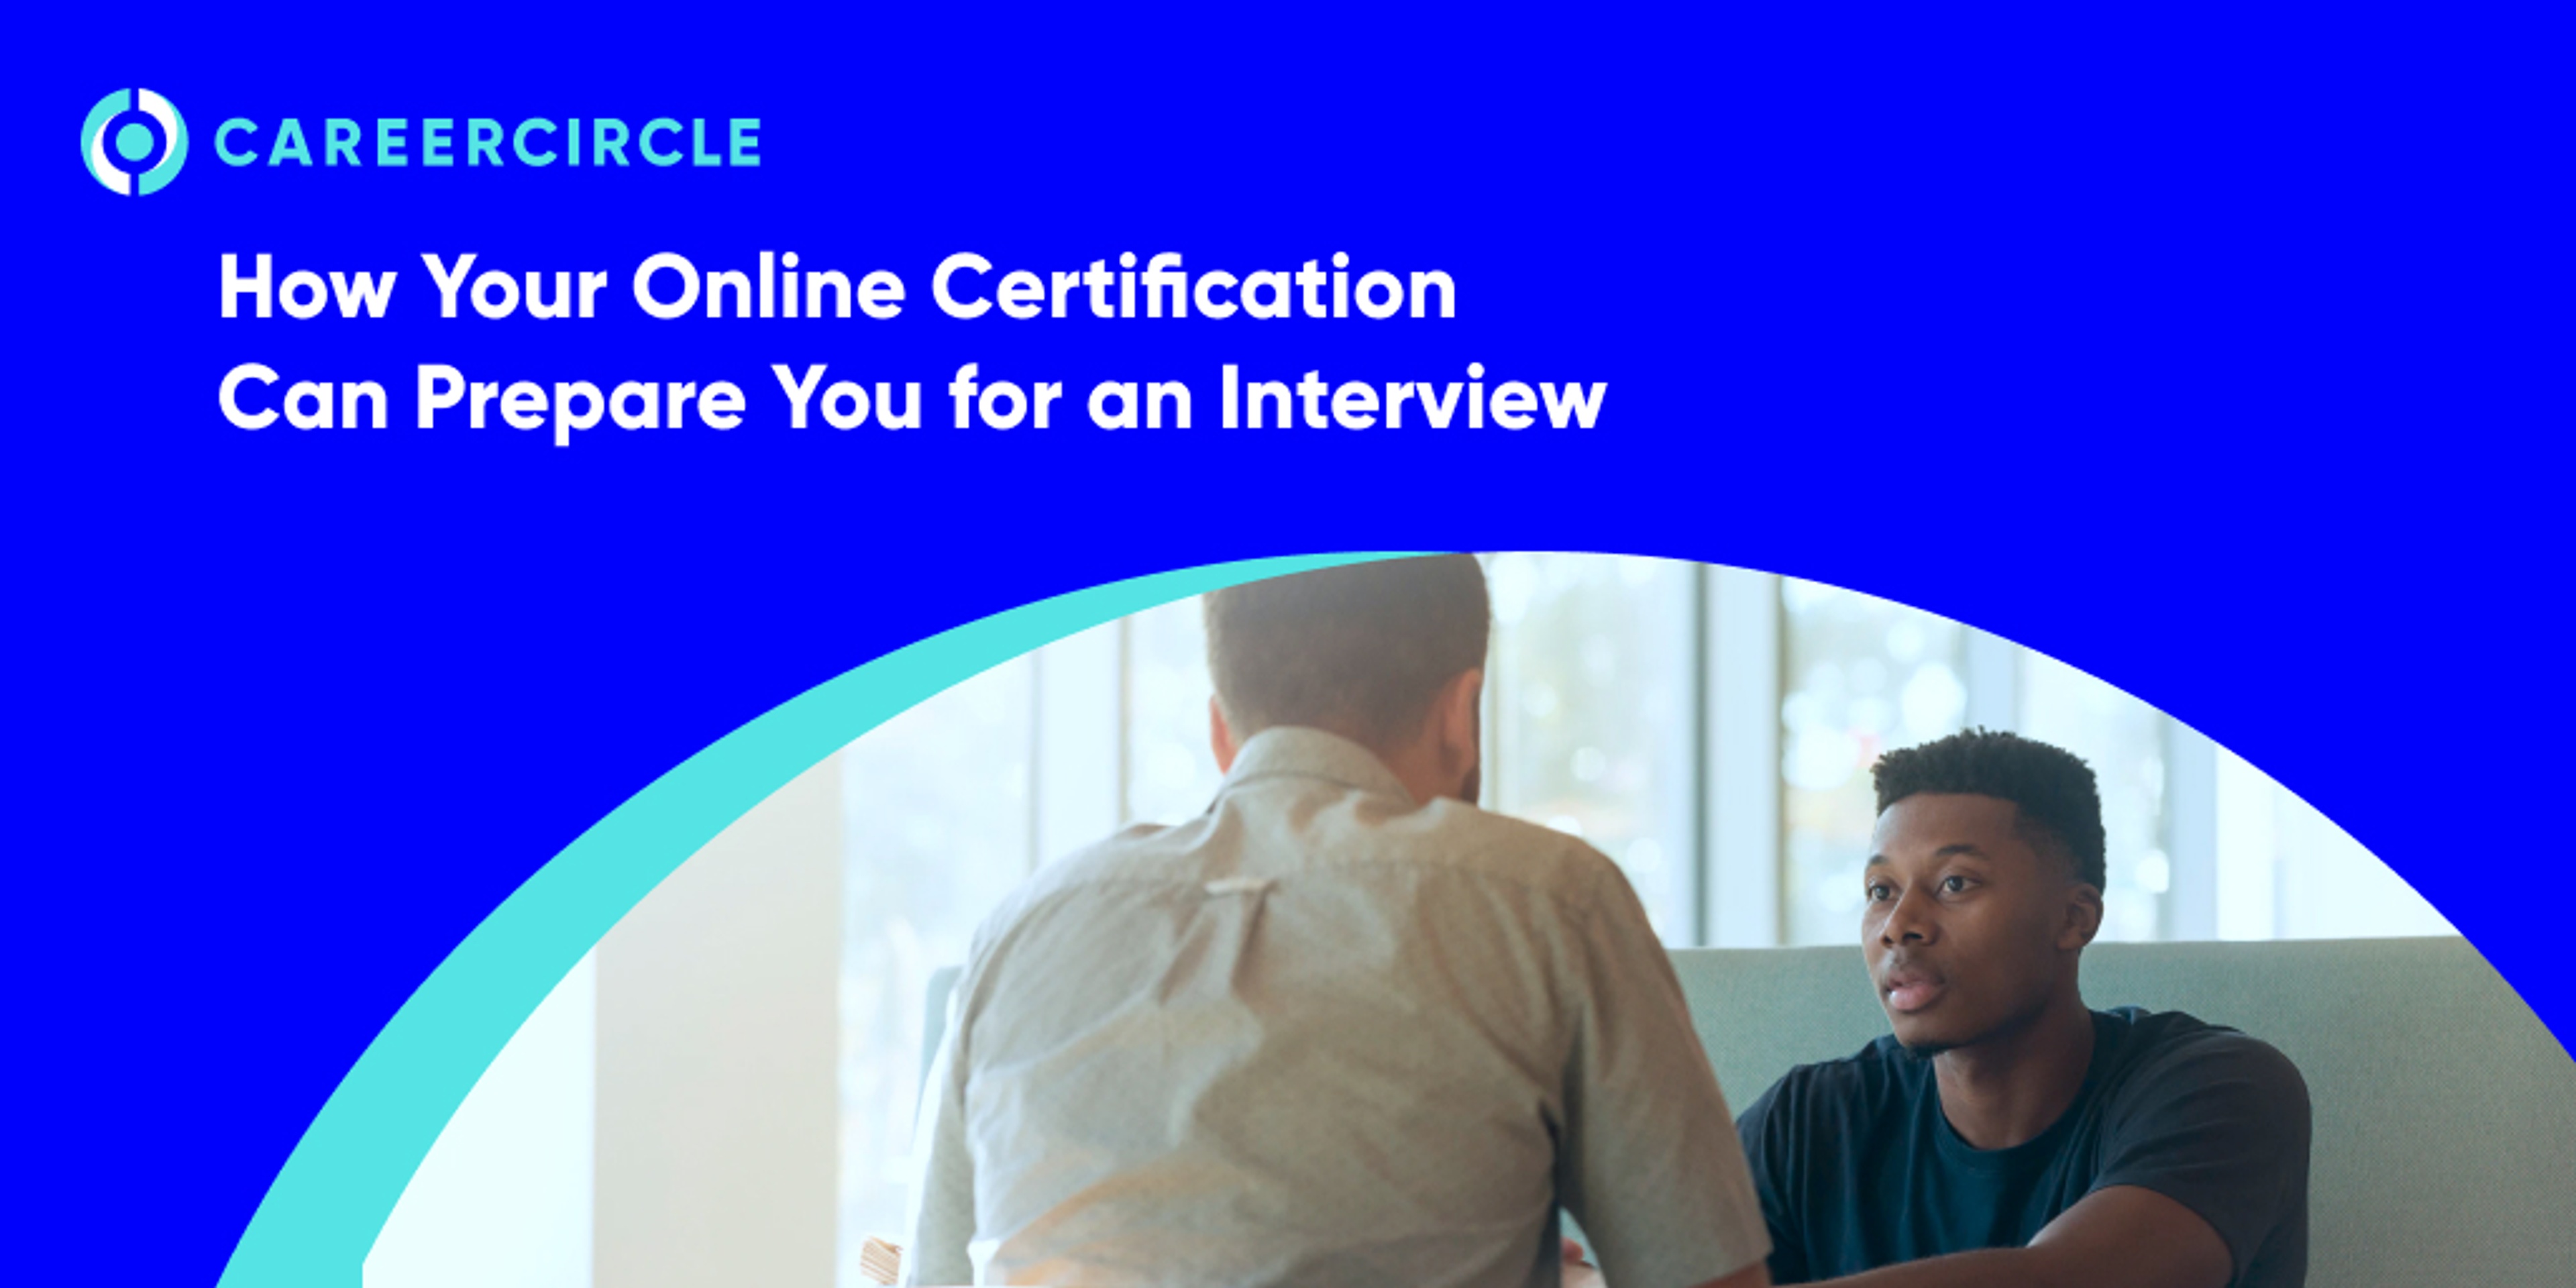 CareerCircle - "How Your Online Certification Can Prepare You for an Interview" with an image of two people in an interview